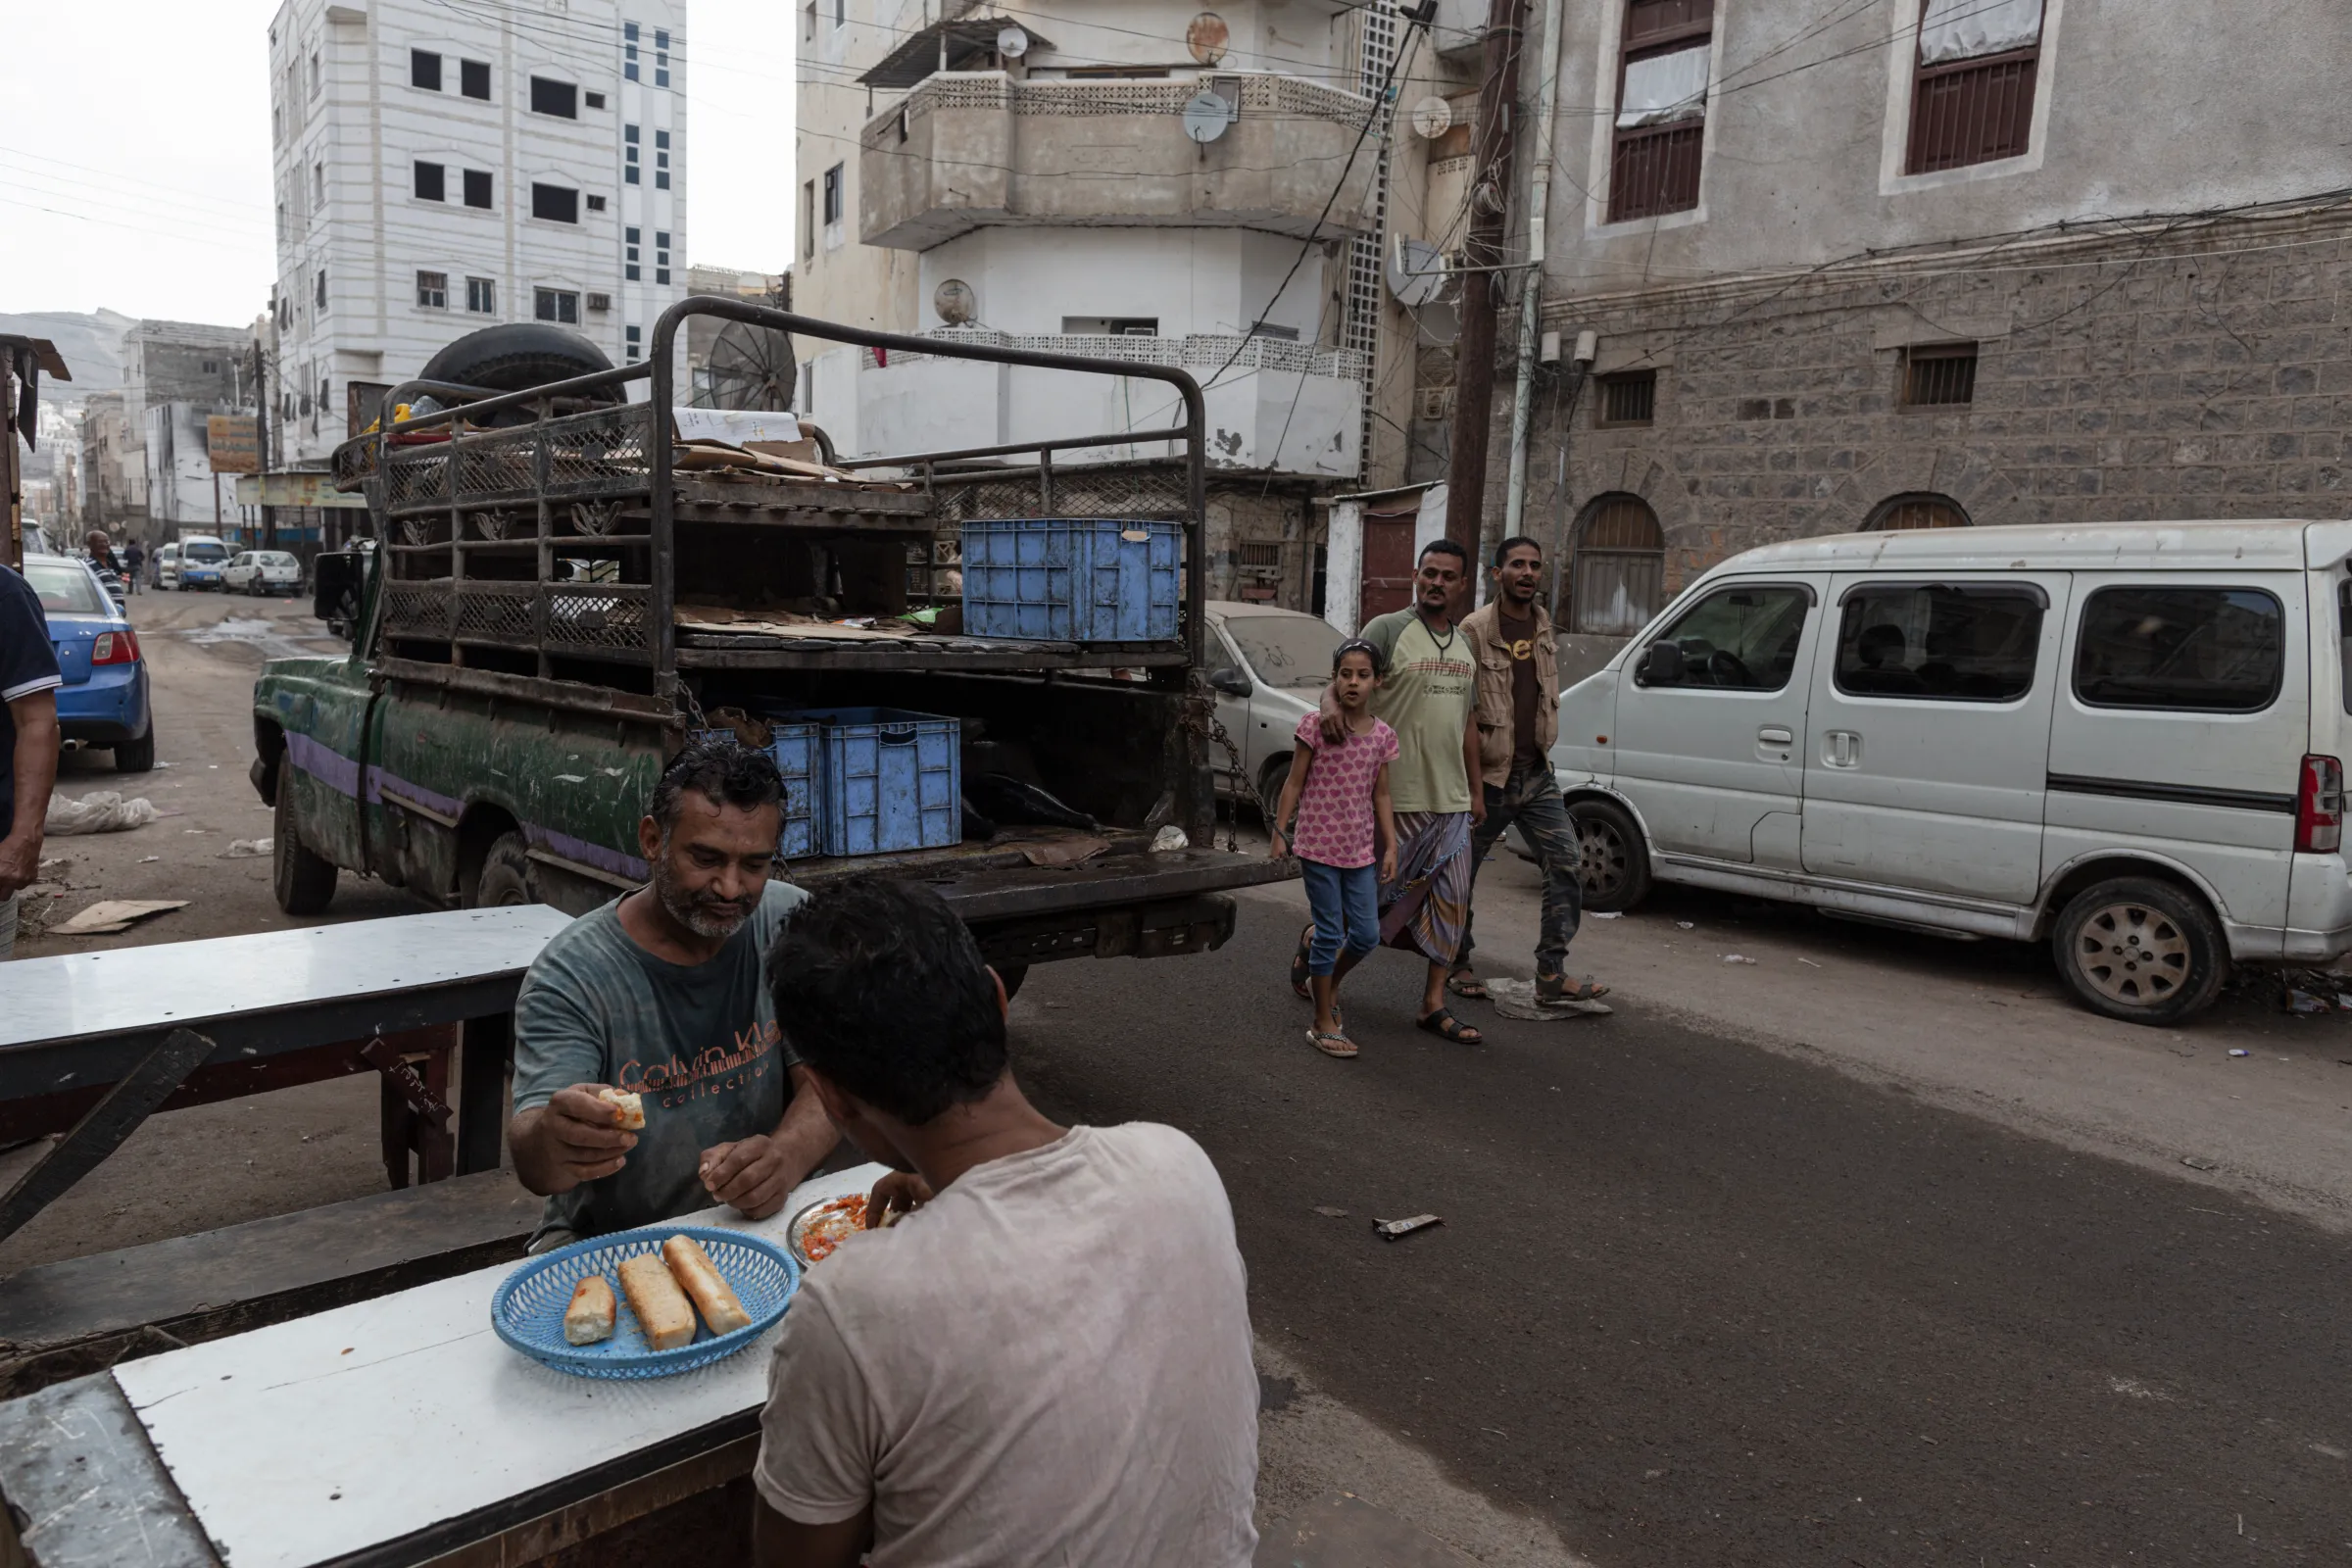 Men eat bread for breakfast at a cafe in Aden, Yemen, on February 26, 2022. Thomson Reuters Foundation/Sam Tarling